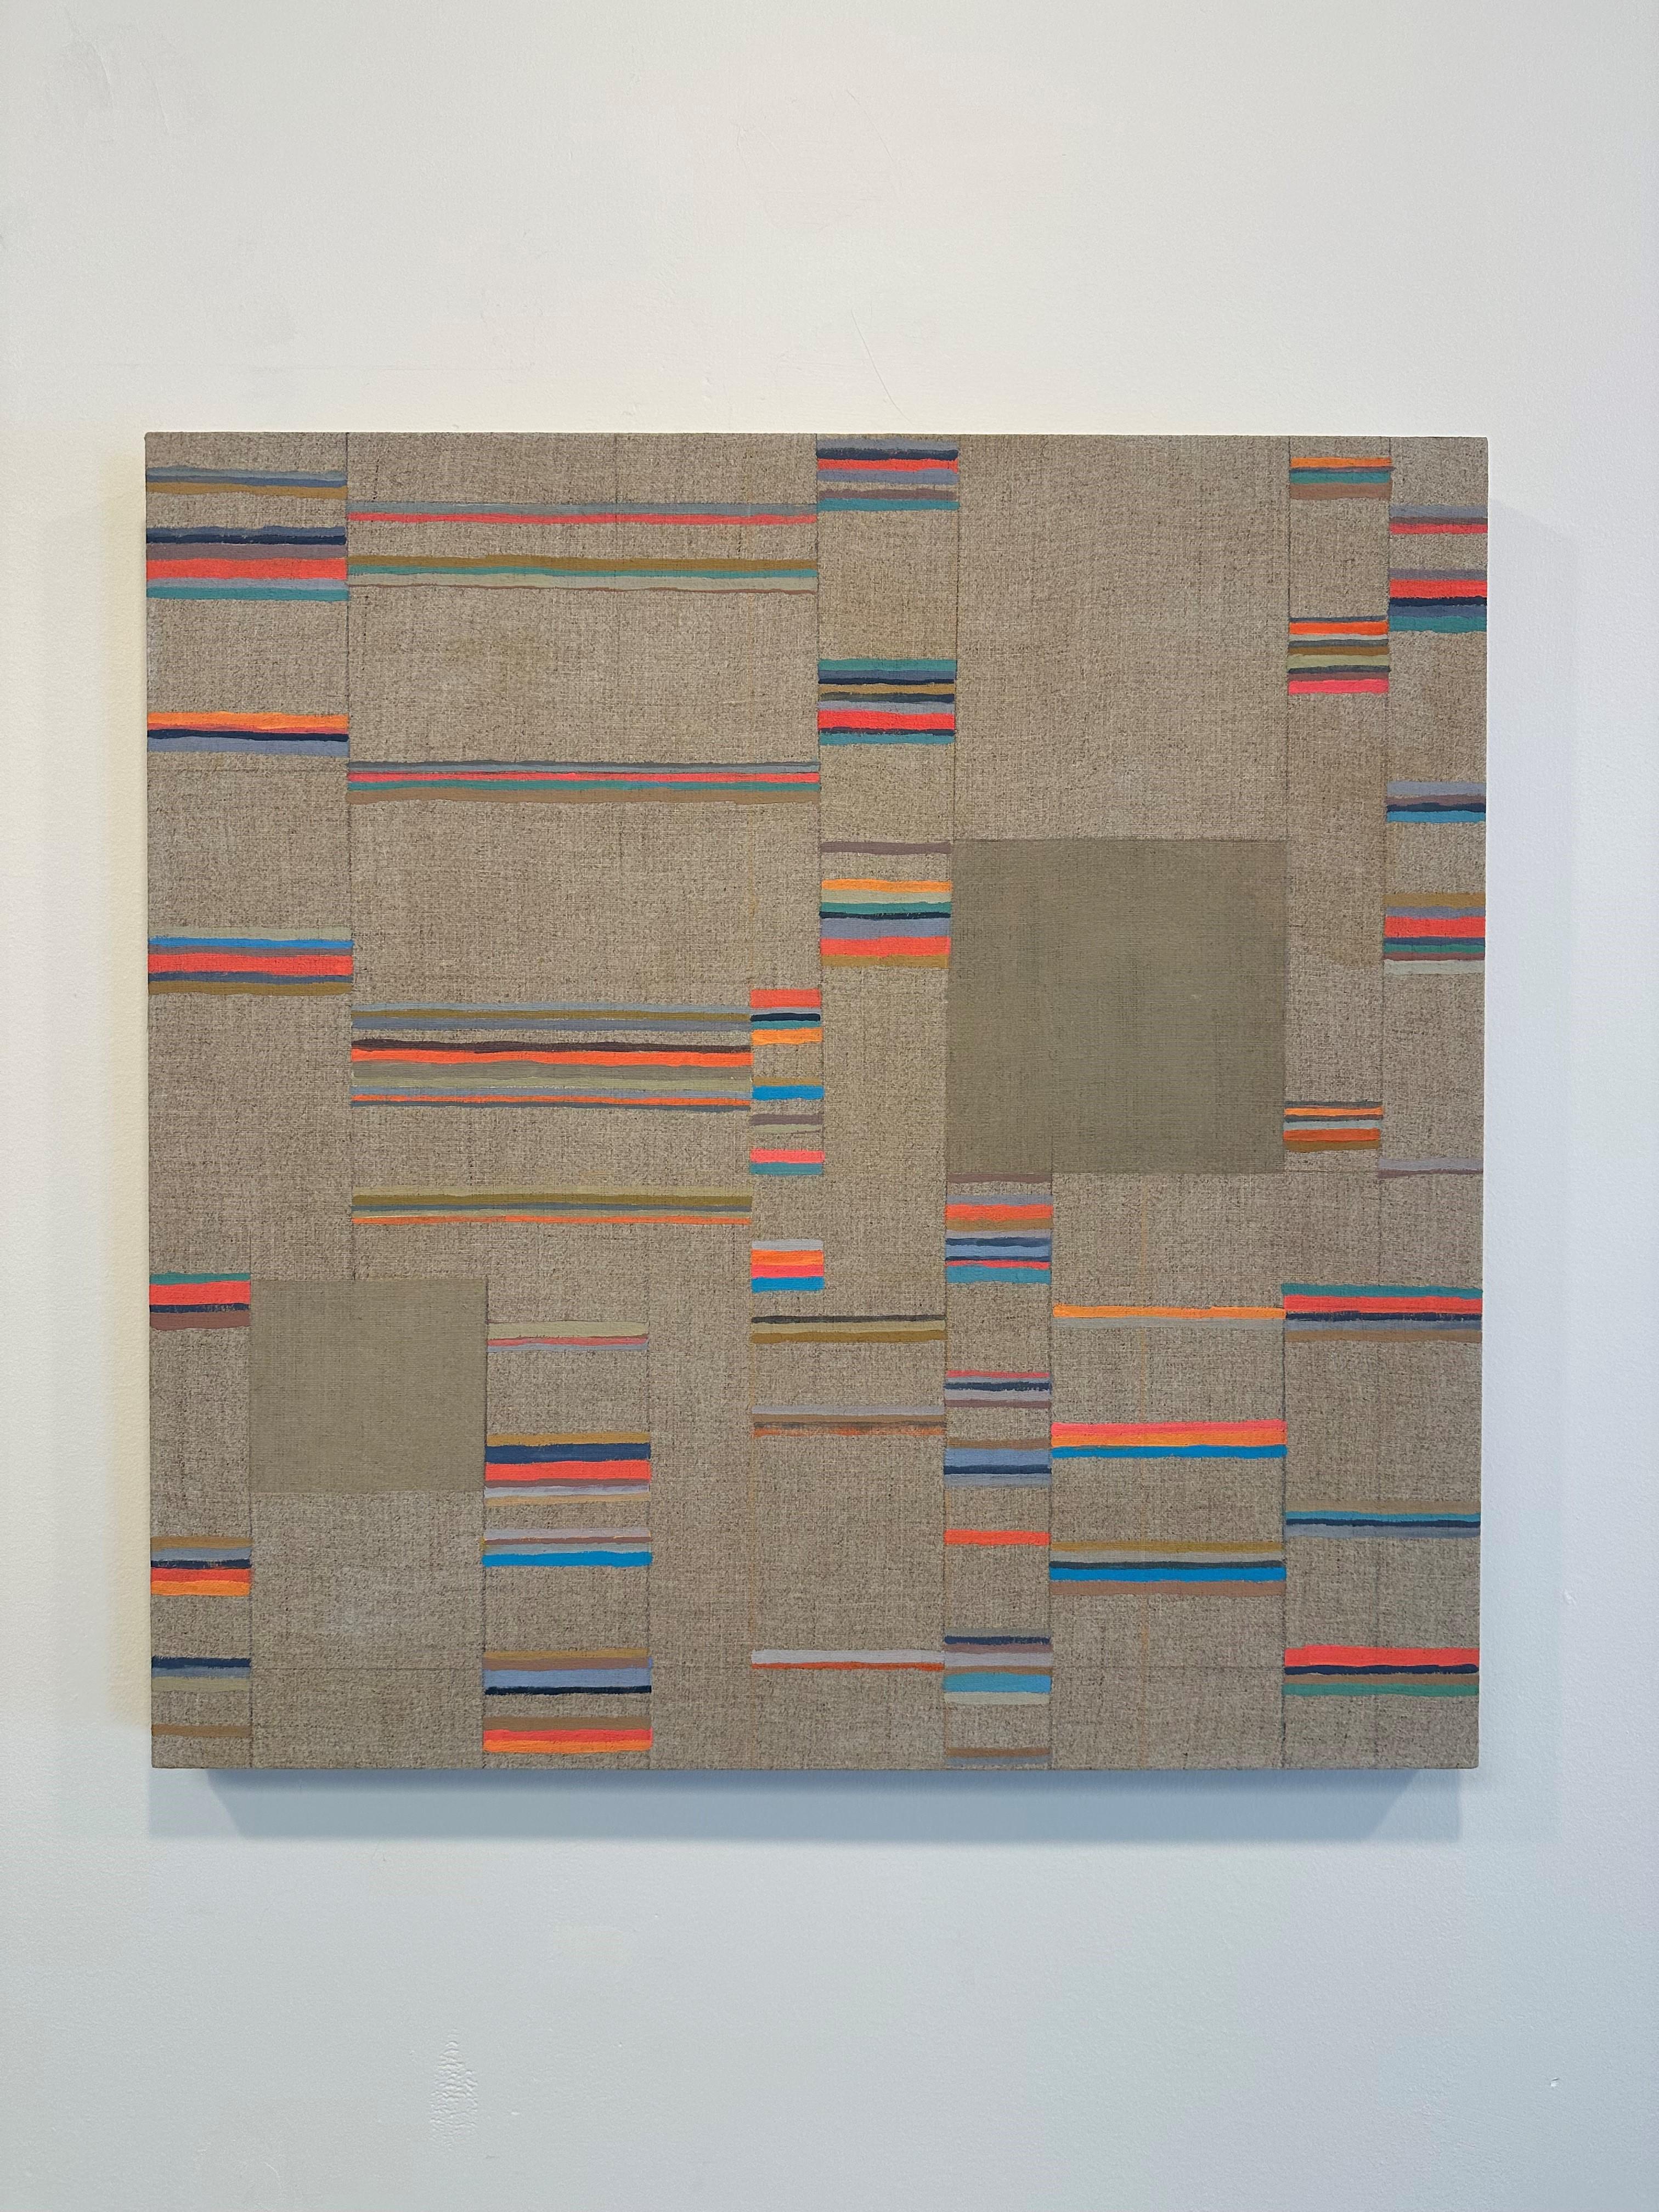 Tambura, Beige, Coral, Green, Brown, Olive, Teal Blue Stripes, Square - Painting by Elizabeth Gourlay